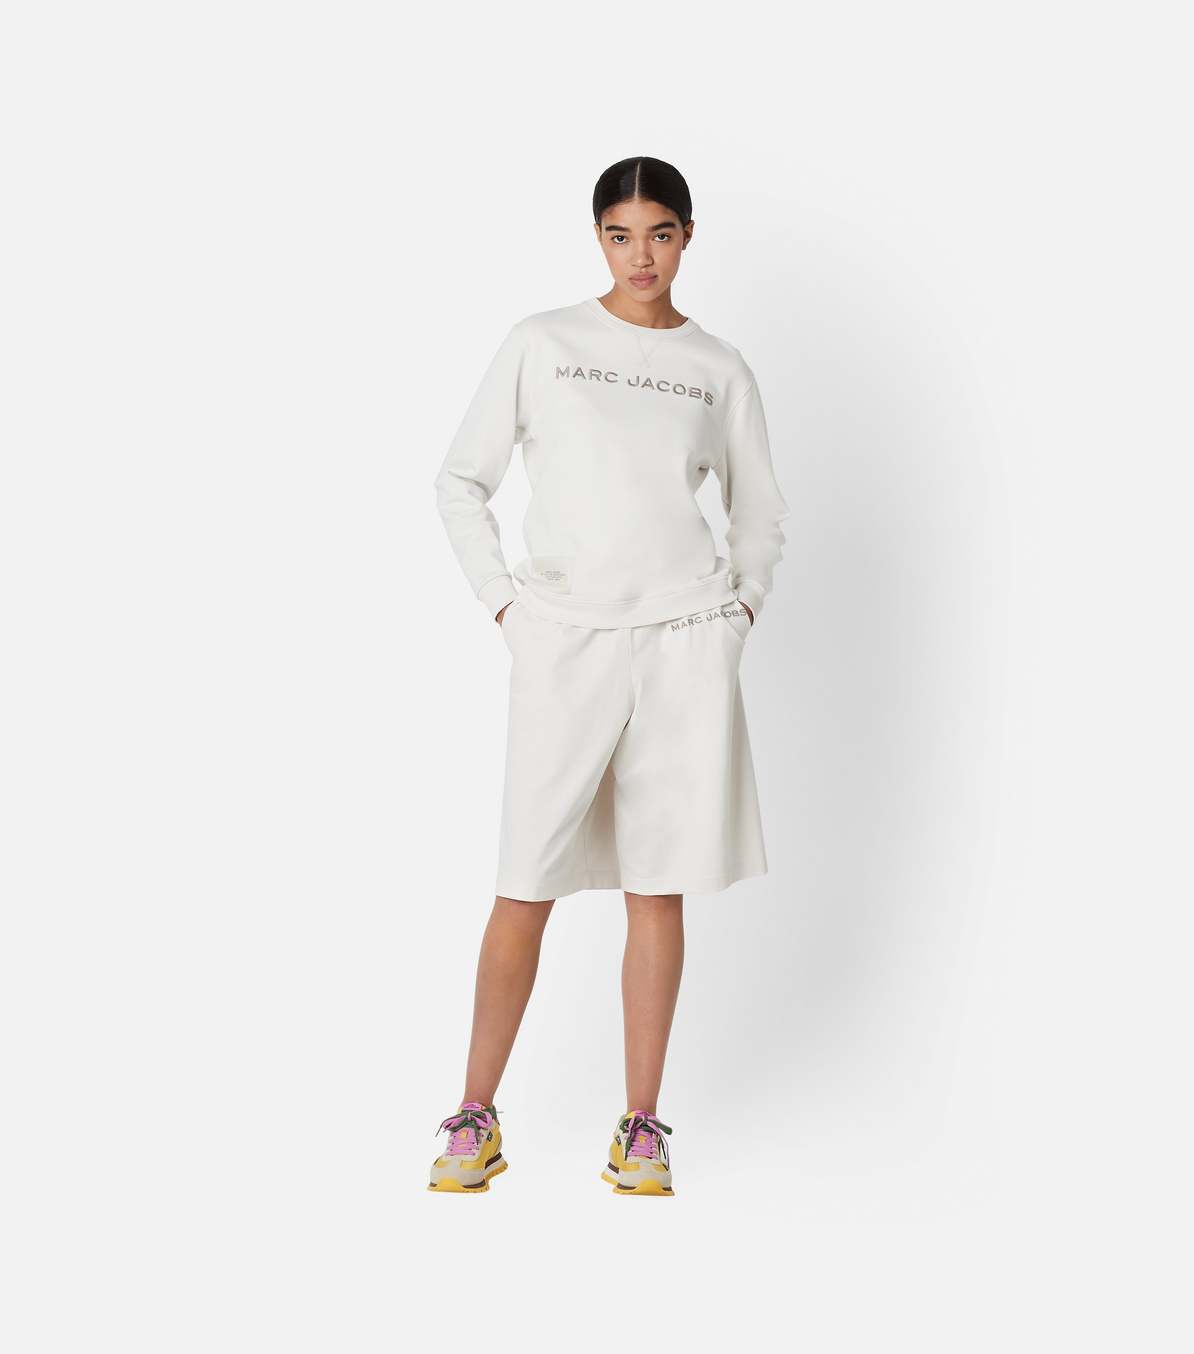 The Sweatshirt | Marc Jacobs | Official Site